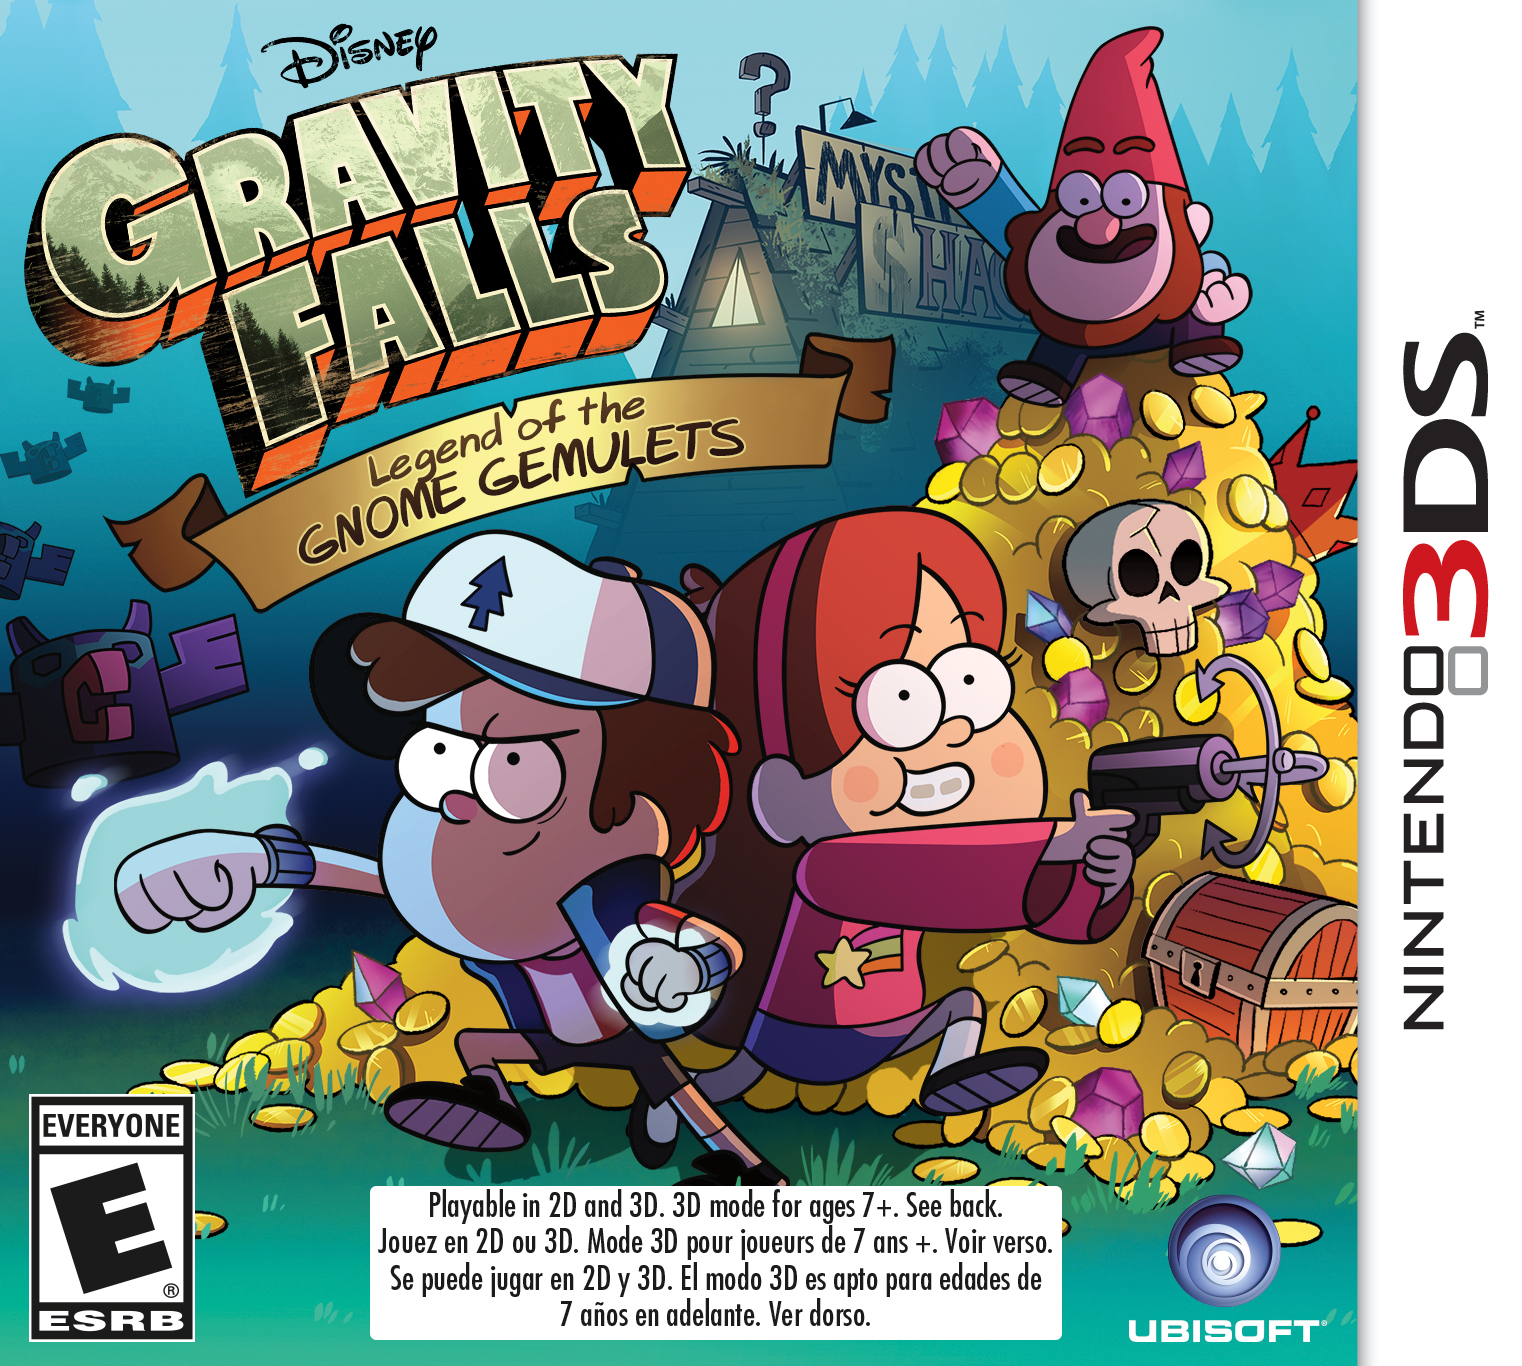 Image of Gravity Falls: Legend of the Gnome Gemulets